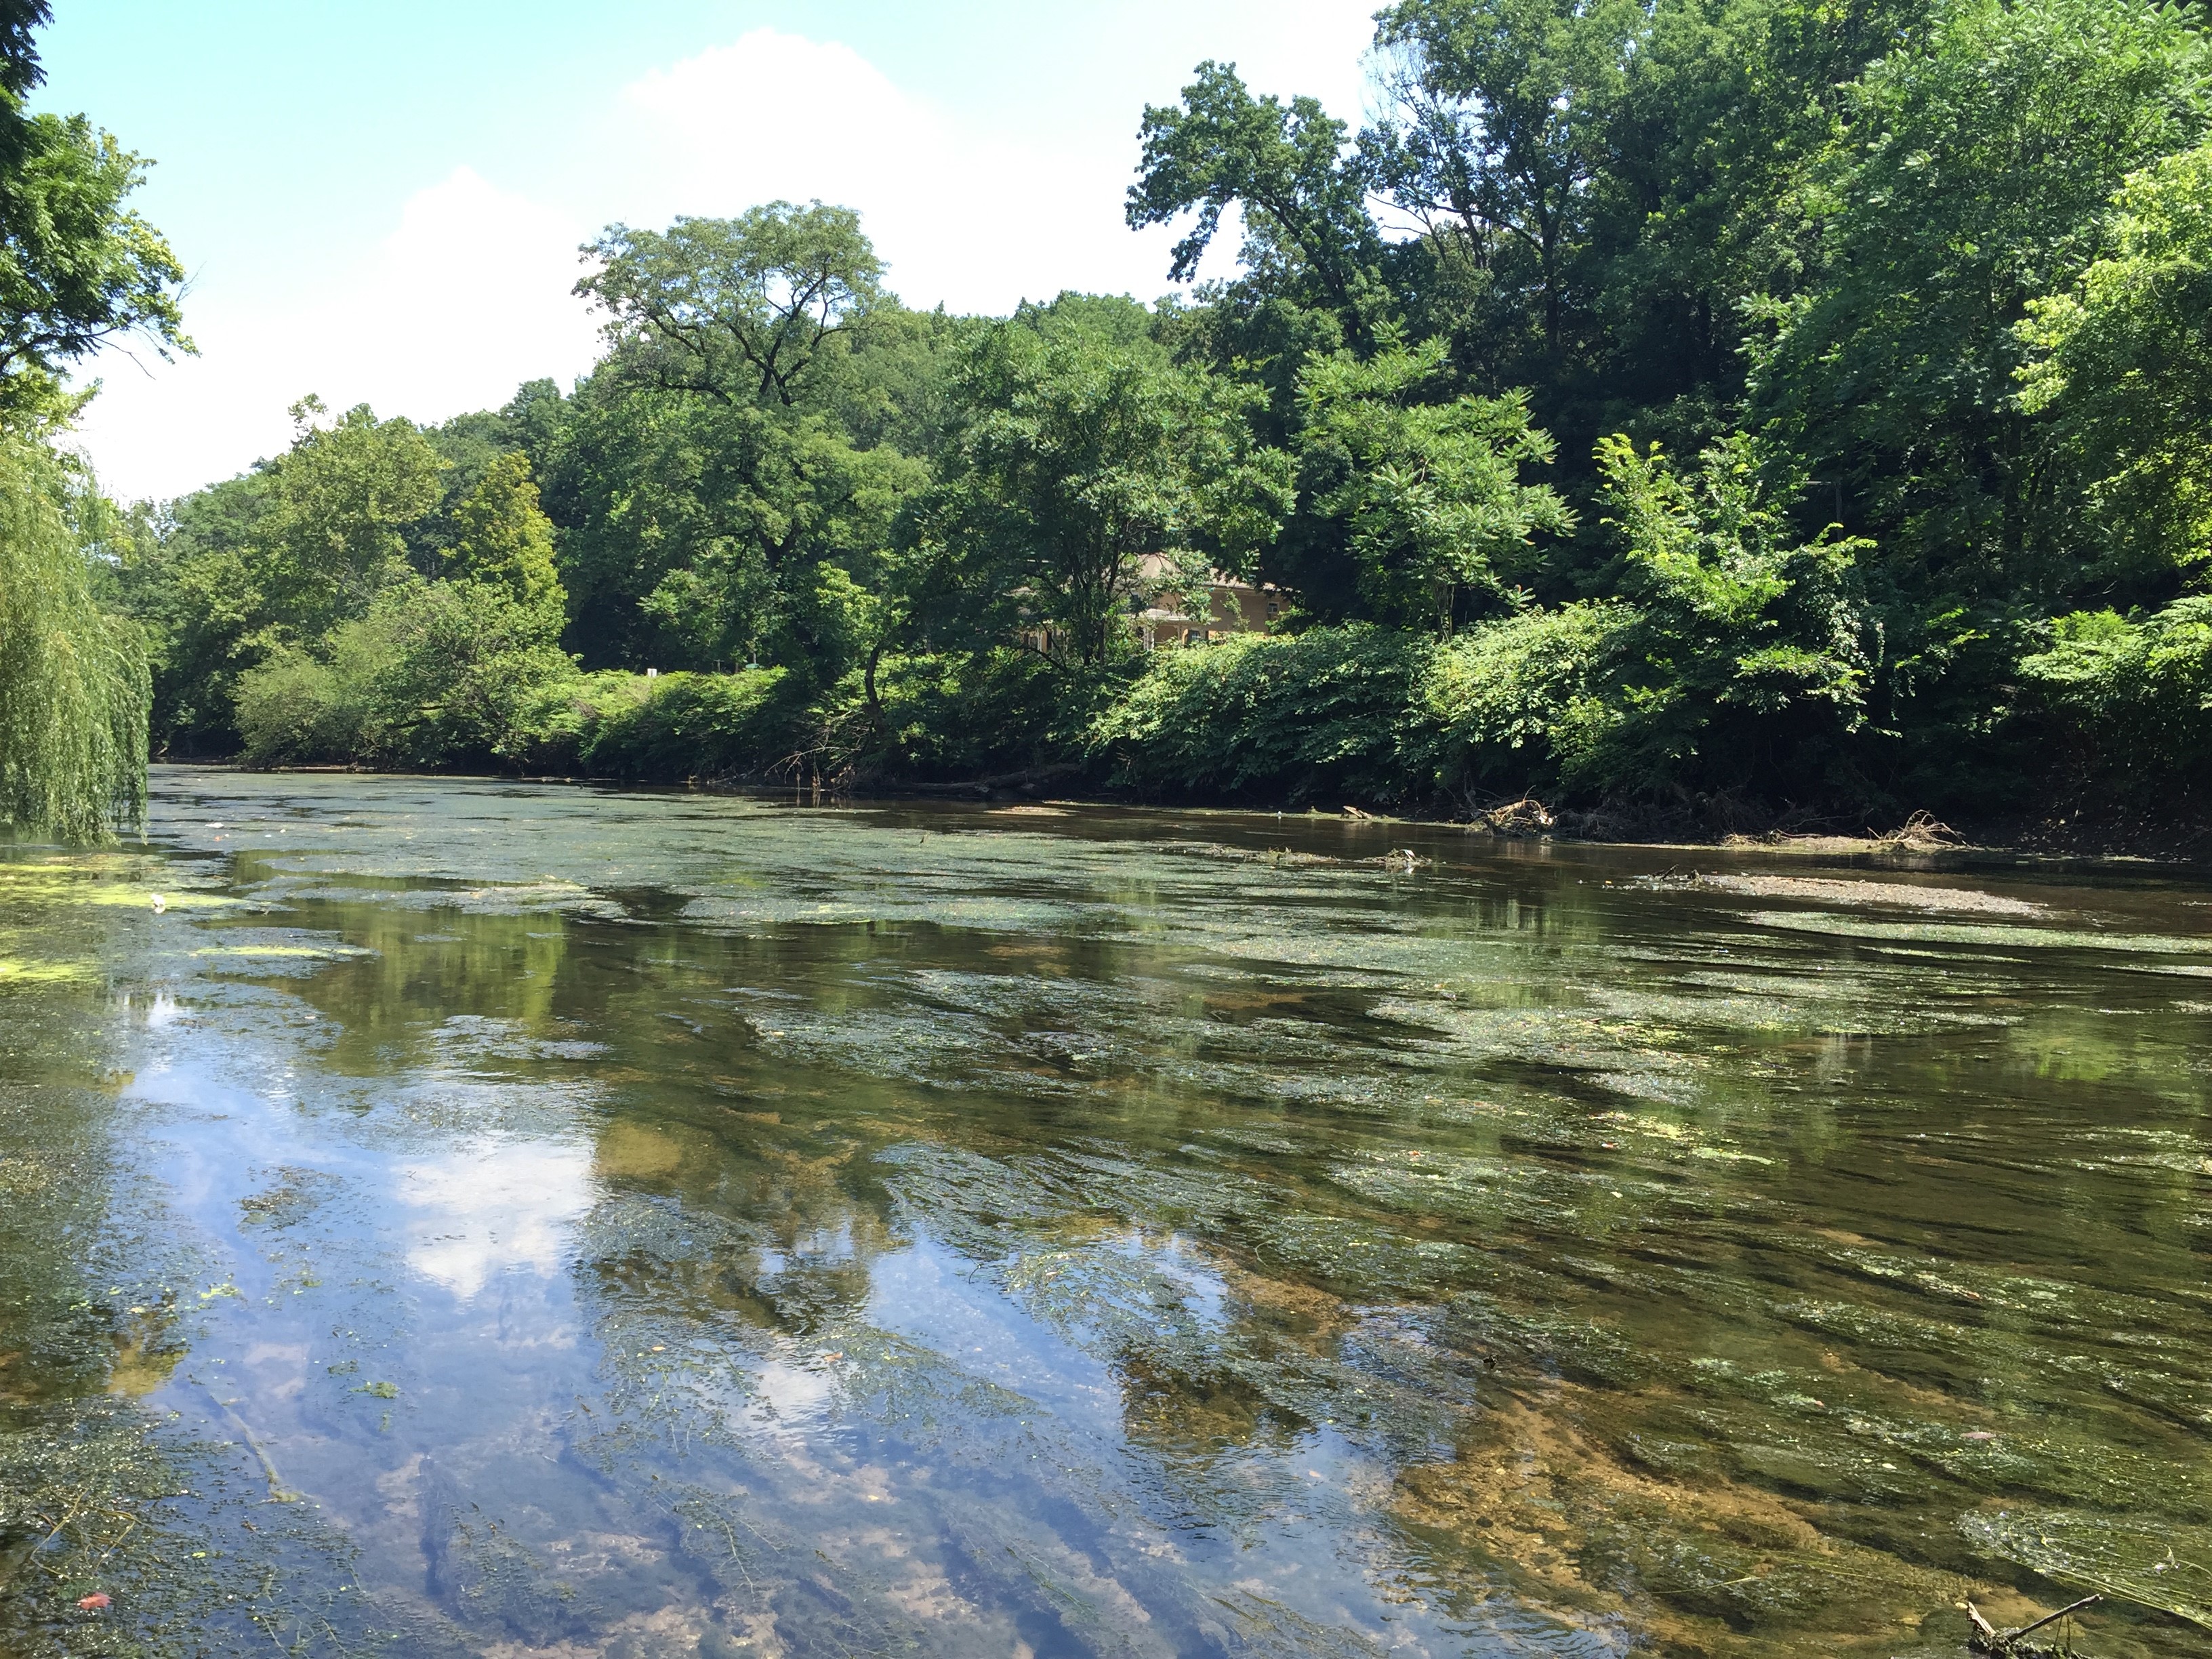 What's Green and Growing in the River? | The EPA Blog